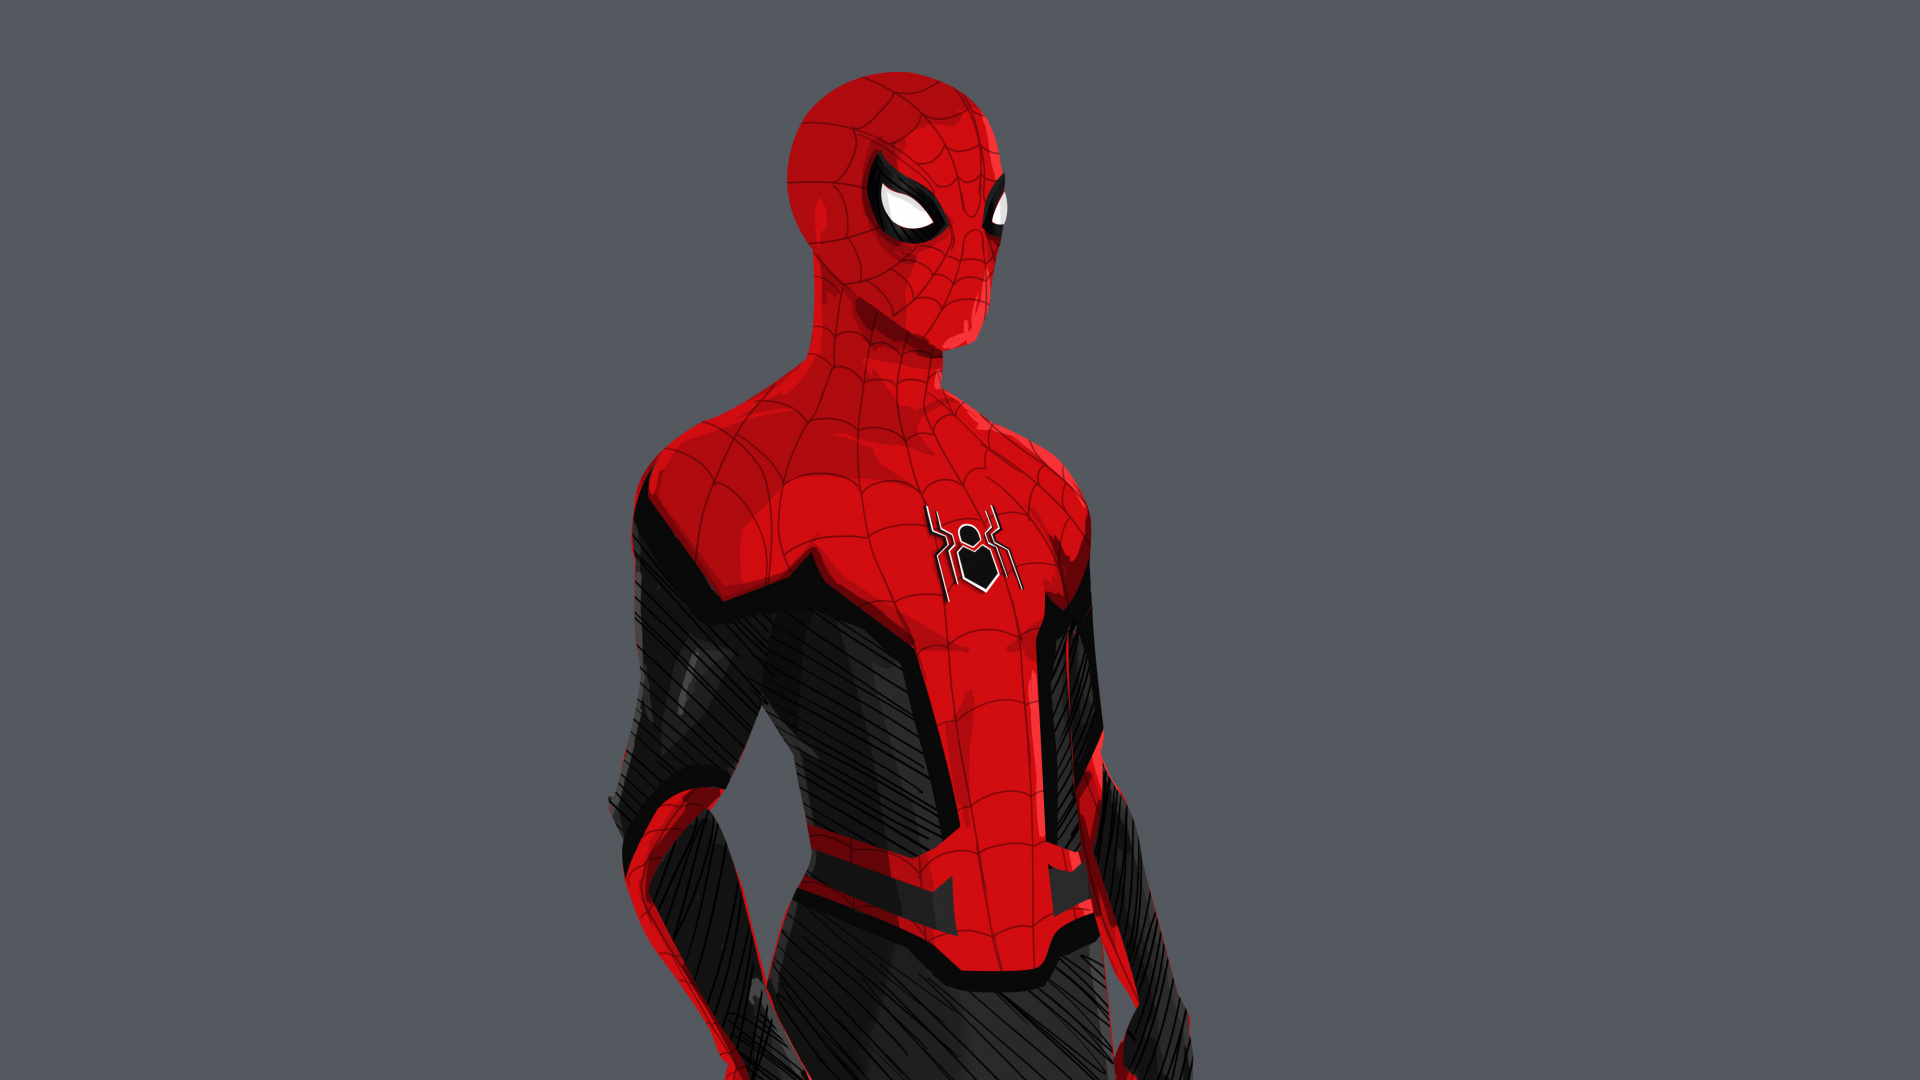 Red and Black Spider Man Illustration. Wallpaper in 1920x1080 Resolution